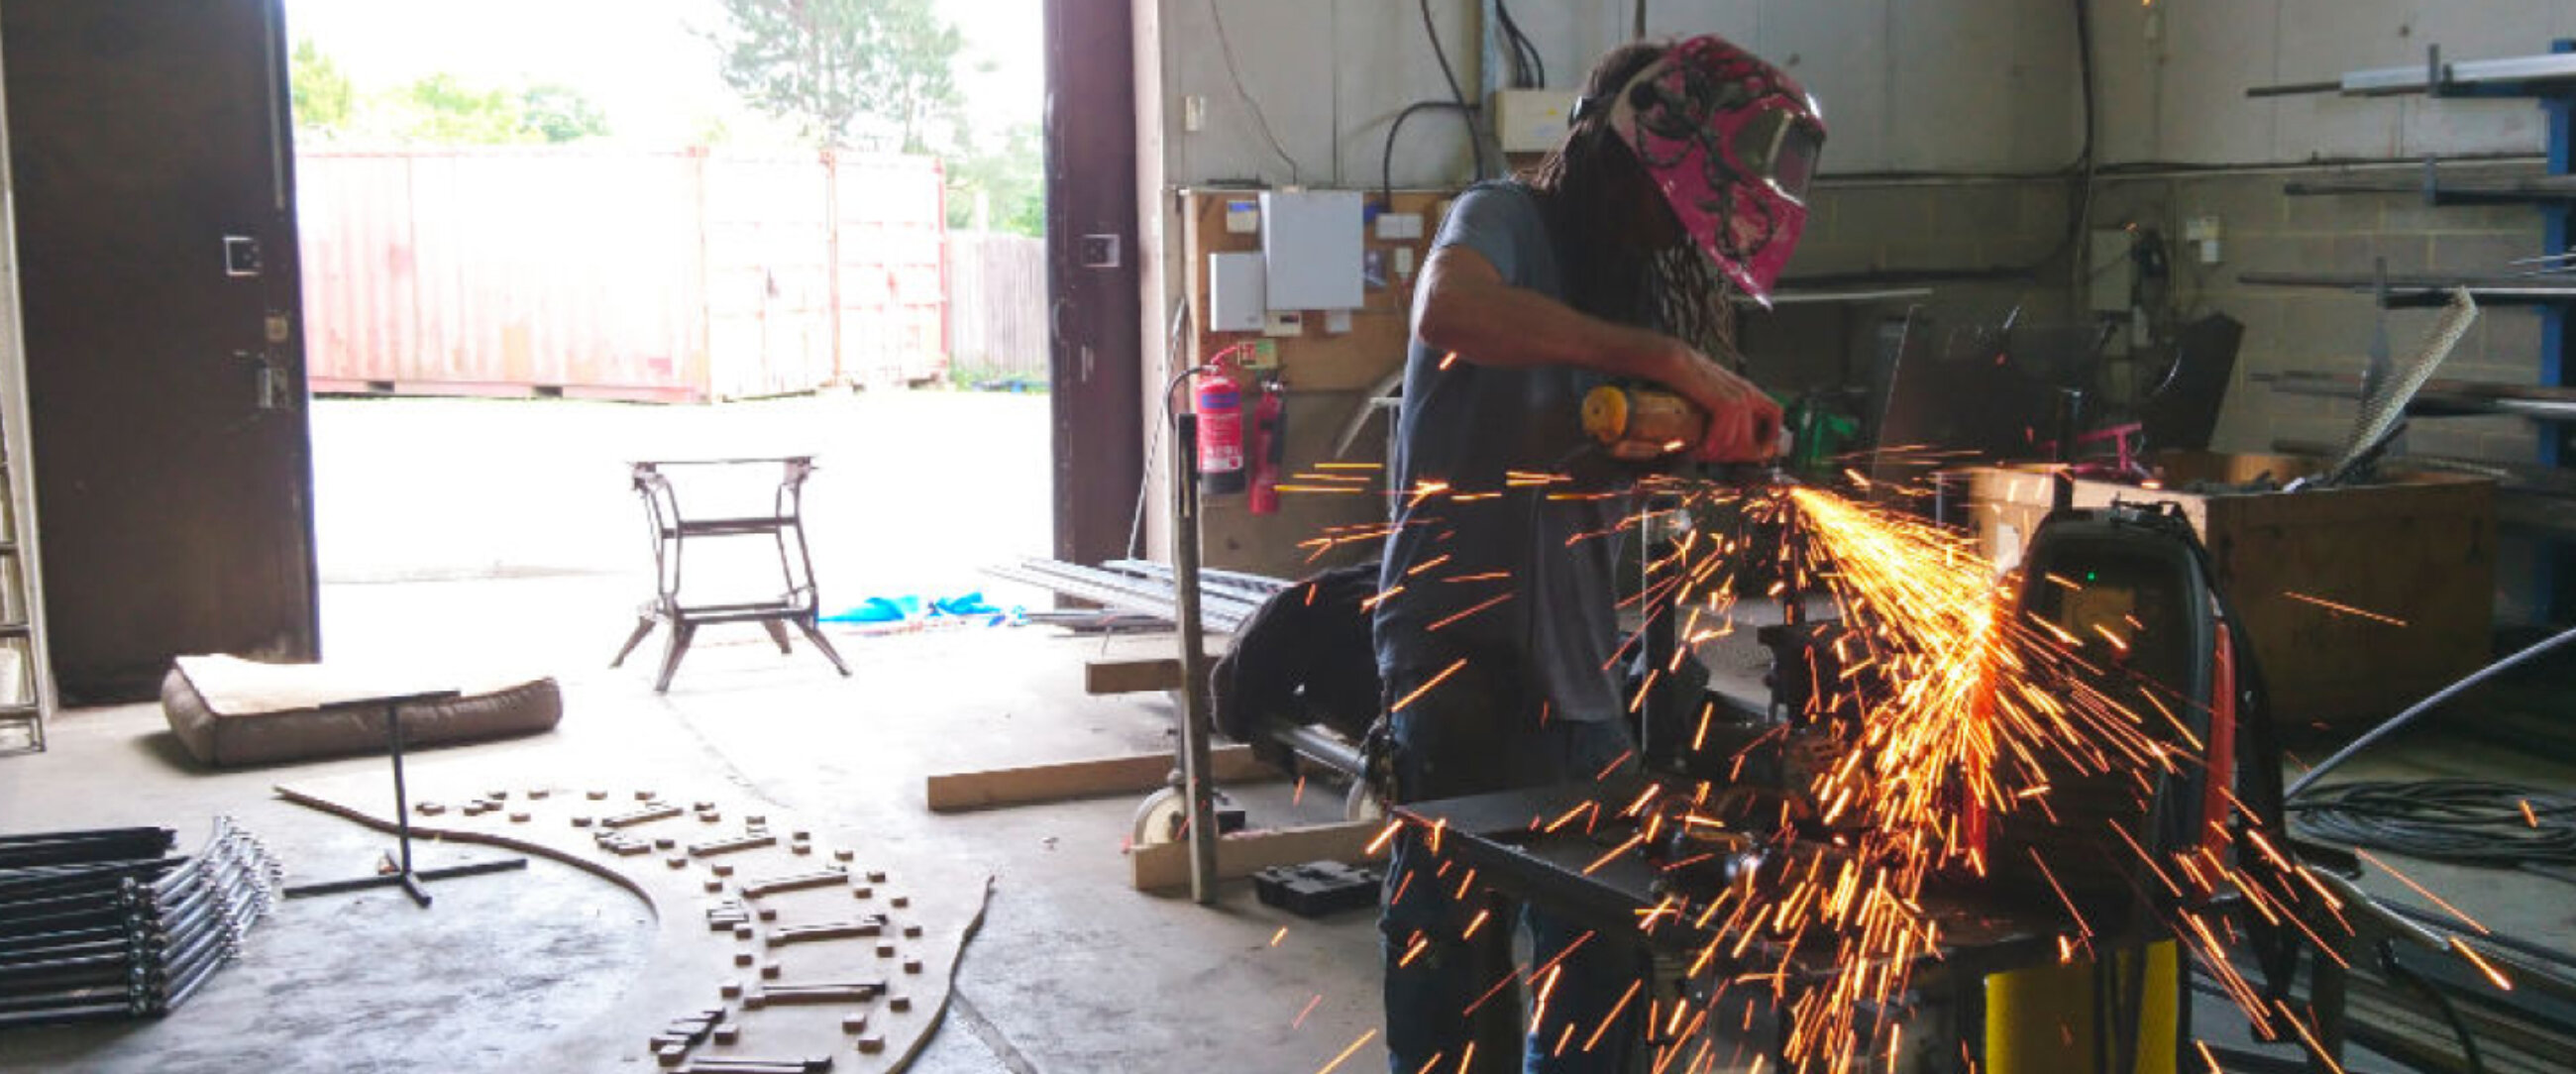 Image taken in 101 Metal workshop. A person wearing a welders visor fabricates a metal frame. Bright orange sparks are flying from the hand held tool.